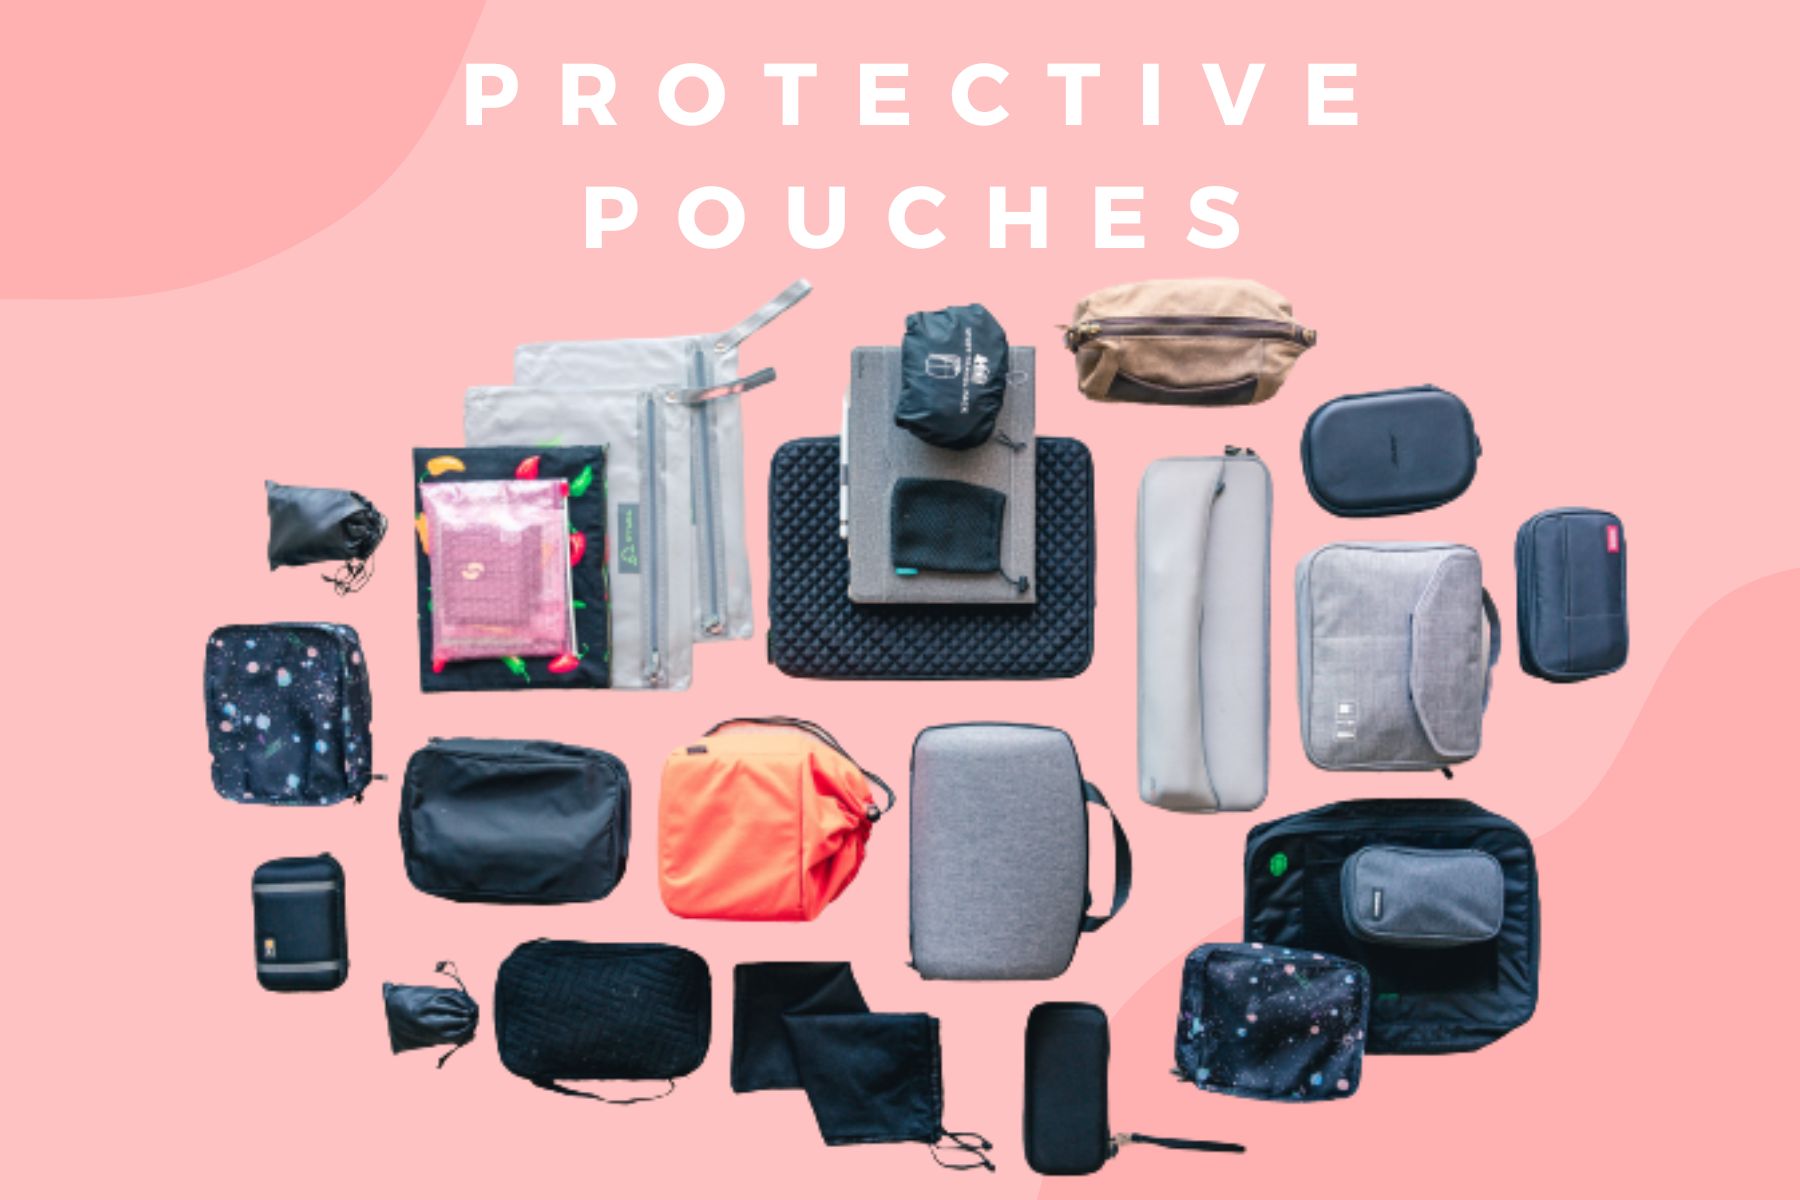 Protective pouches